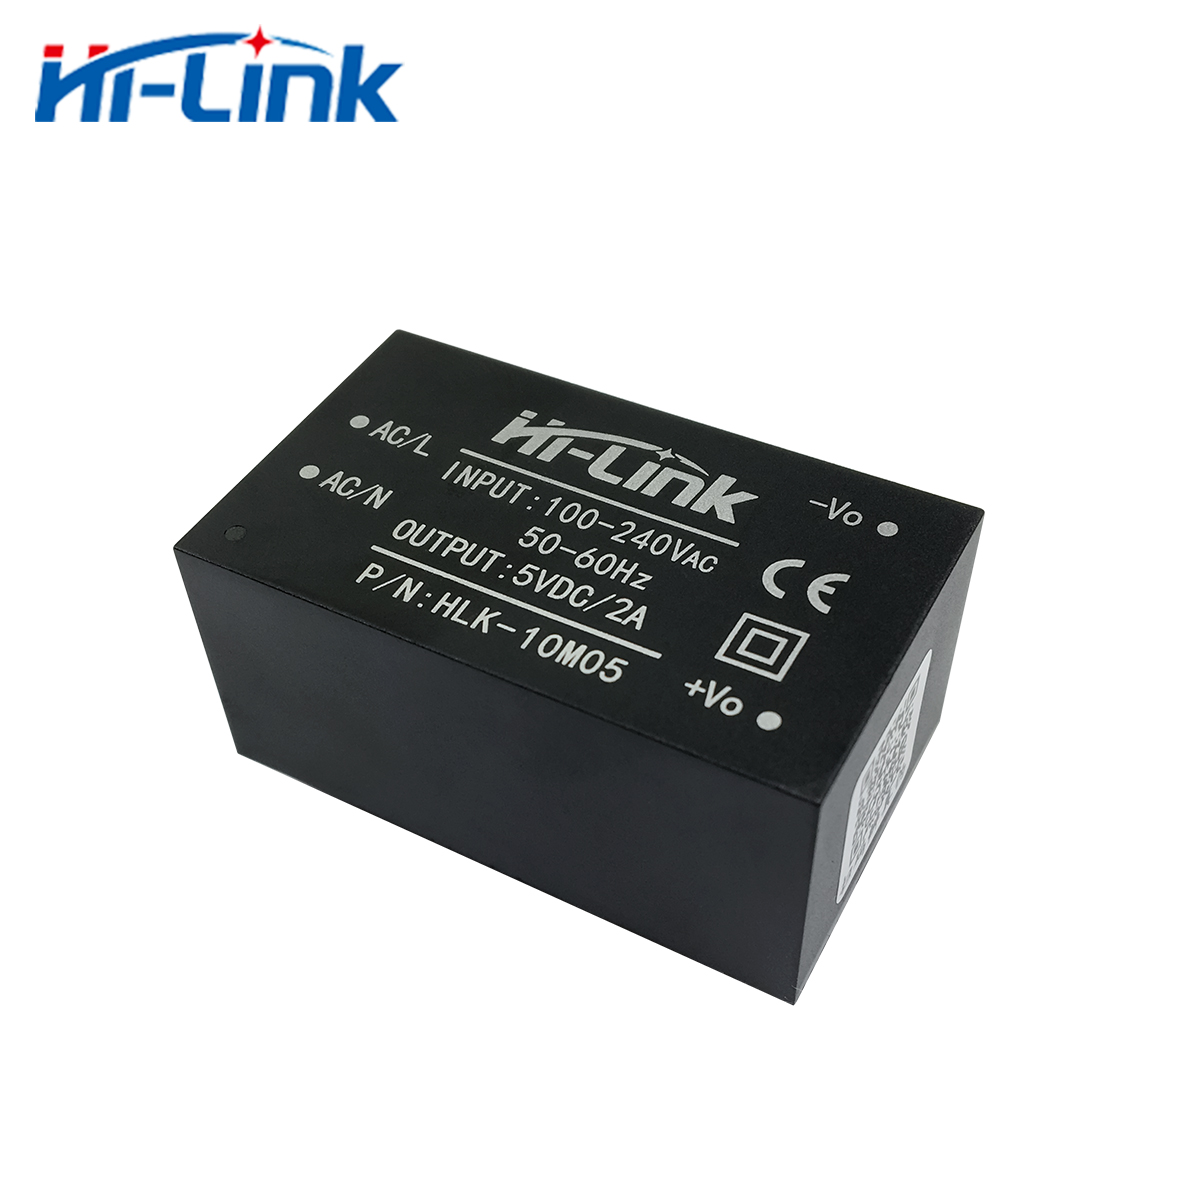 Free shipping Hi-Link new 5pcs 220v 5V 2A 10W AC DC isolated switching step down power supply module AC DC converter HLK-10M05